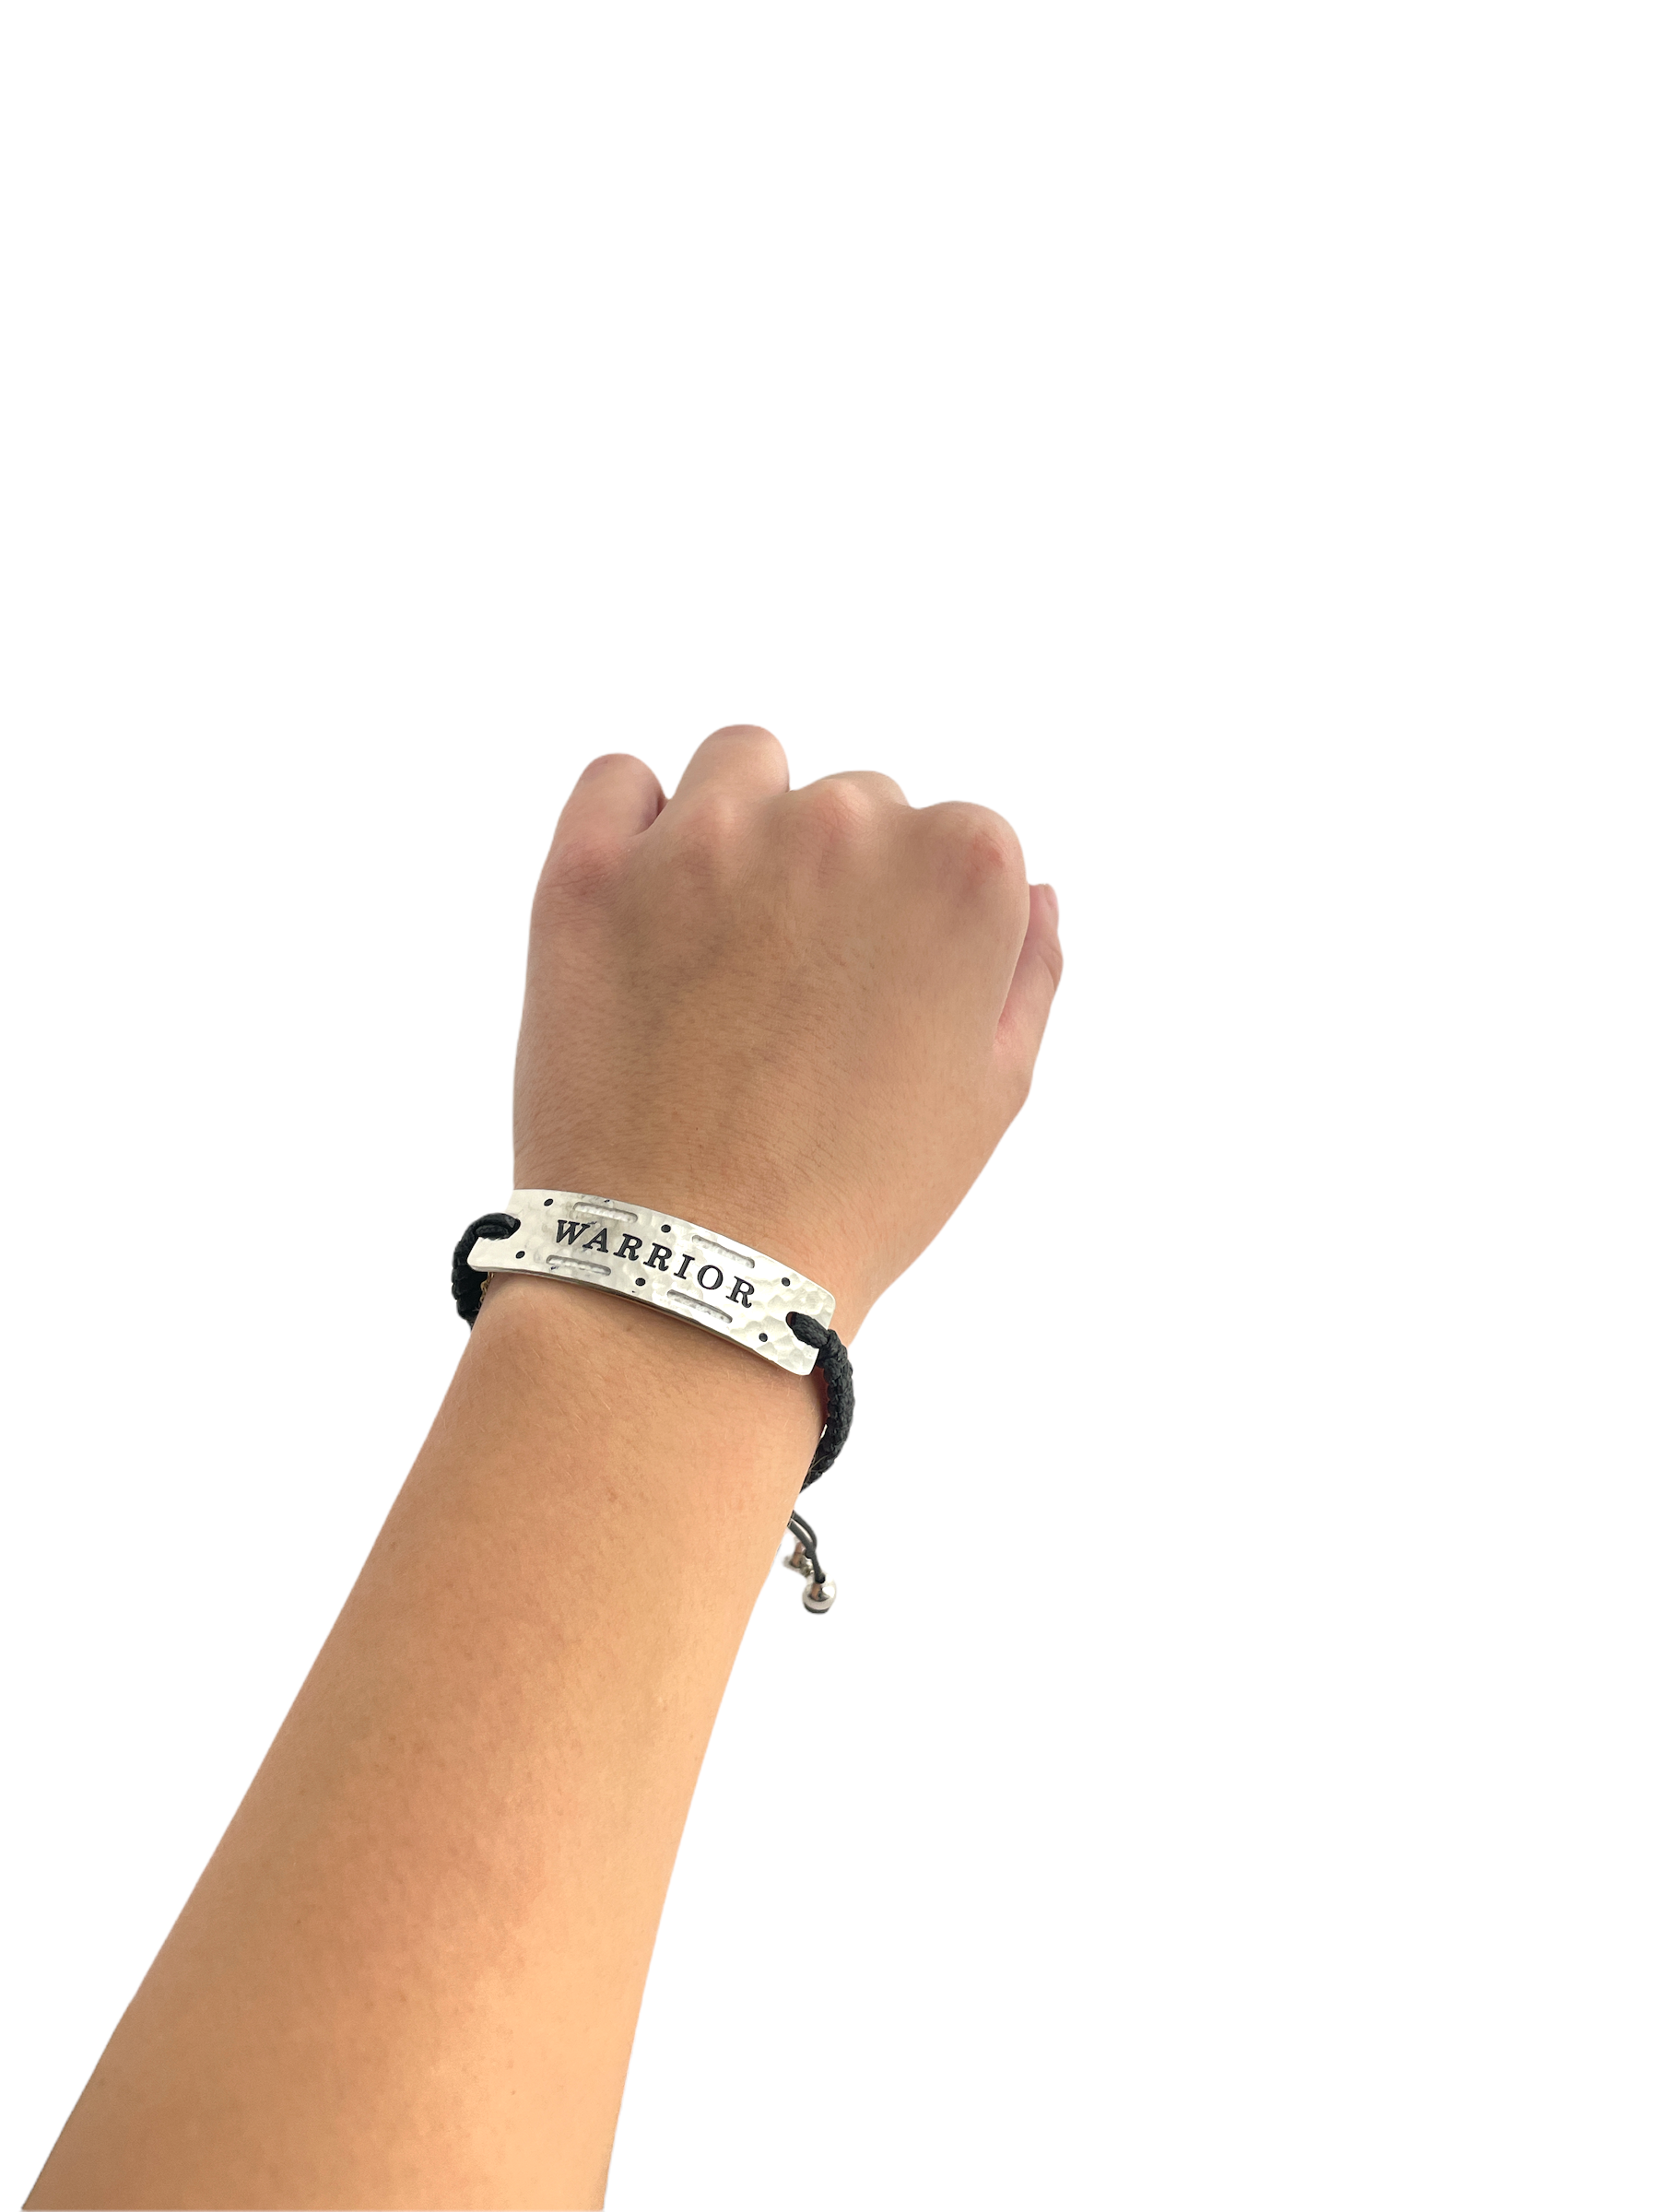 Warrior - Vented In Brooklyn Power Word Aromatherapy Essential Oil Diffuser Bracelet